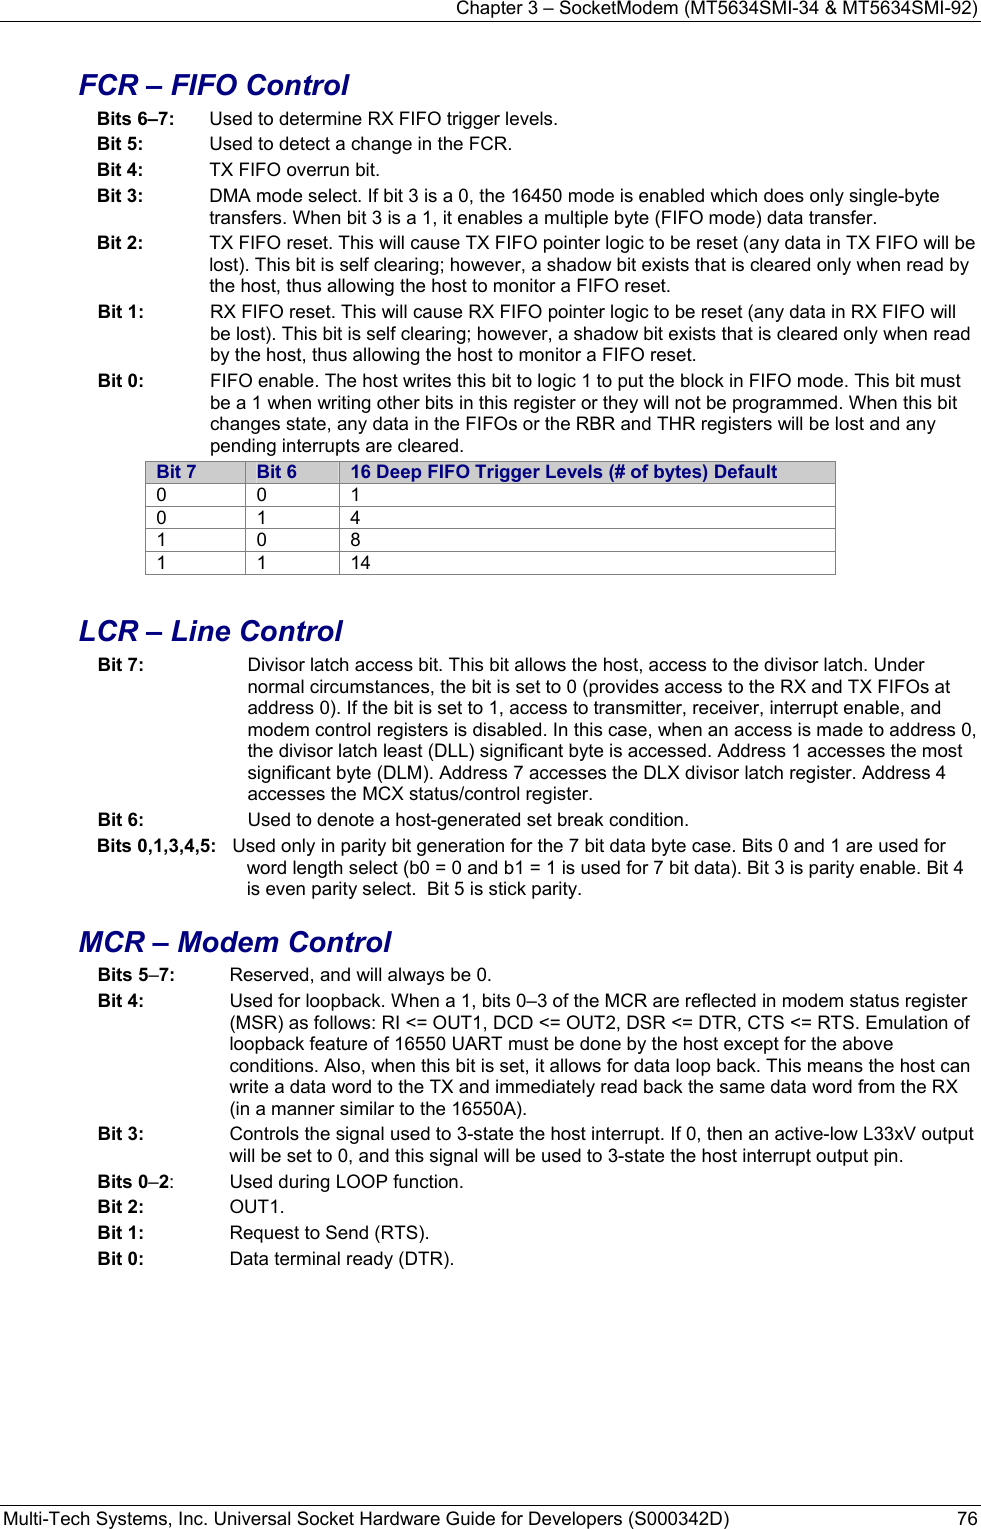 Chapter 3 – SocketModem (MT5634SMI-34 &amp; MT5634SMI-92) Multi-Tech Systems, Inc. Universal Socket Hardware Guide for Developers (S000342D)  76  FCR – FIFO Control Bits 6–7:  Used to determine RX FIFO trigger levels. Bit 5:  Used to detect a change in the FCR. Bit 4:   TX FIFO overrun bit. Bit 3:   DMA mode select. If bit 3 is a 0, the 16450 mode is enabled which does only single-byte transfers. When bit 3 is a 1, it enables a multiple byte (FIFO mode) data transfer. Bit 2:   TX FIFO reset. This will cause TX FIFO pointer logic to be reset (any data in TX FIFO will be lost). This bit is self clearing; however, a shadow bit exists that is cleared only when read by the host, thus allowing the host to monitor a FIFO reset. Bit 1:   RX FIFO reset. This will cause RX FIFO pointer logic to be reset (any data in RX FIFO will be lost). This bit is self clearing; however, a shadow bit exists that is cleared only when read by the host, thus allowing the host to monitor a FIFO reset. Bit 0:   FIFO enable. The host writes this bit to logic 1 to put the block in FIFO mode. This bit must be a 1 when writing other bits in this register or they will not be programmed. When this bit changes state, any data in the FIFOs or the RBR and THR registers will be lost and any pending interrupts are cleared. Bit 7  Bit 6  16 Deep FIFO Trigger Levels (# of bytes) Default 0 0 1 0 1 4 1 0 8 1 1 14  LCR – Line Control Bit 7:   Divisor latch access bit. This bit allows the host, access to the divisor latch. Under normal circumstances, the bit is set to 0 (provides access to the RX and TX FIFOs at address 0). If the bit is set to 1, access to transmitter, receiver, interrupt enable, and modem control registers is disabled. In this case, when an access is made to address 0, the divisor latch least (DLL) significant byte is accessed. Address 1 accesses the most significant byte (DLM). Address 7 accesses the DLX divisor latch register. Address 4 accesses the MCX status/control register. Bit 6:   Used to denote a host-generated set break condition. Bits 0,1,3,4,5:   Used only in parity bit generation for the 7 bit data byte case. Bits 0 and 1 are used for word length select (b0 = 0 and b1 = 1 is used for 7 bit data). Bit 3 is parity enable. Bit 4 is even parity select.  Bit 5 is stick parity. MCR – Modem Control Bits 5–7:  Reserved, and will always be 0. Bit 4:   Used for loopback. When a 1, bits 0–3 of the MCR are reflected in modem status register (MSR) as follows: RI &lt;= OUT1, DCD &lt;= OUT2, DSR &lt;= DTR, CTS &lt;= RTS. Emulation of loopback feature of 16550 UART must be done by the host except for the above conditions. Also, when this bit is set, it allows for data loop back. This means the host can write a data word to the TX and immediately read back the same data word from the RX (in a manner similar to the 16550A). Bit 3:   Controls the signal used to 3-state the host interrupt. If 0, then an active-low L33xV output will be set to 0, and this signal will be used to 3-state the host interrupt output pin. Bits 0–2:  Used during LOOP function. Bit 2:  OUT1. Bit 1:   Request to Send (RTS). Bit 0:   Data terminal ready (DTR). 